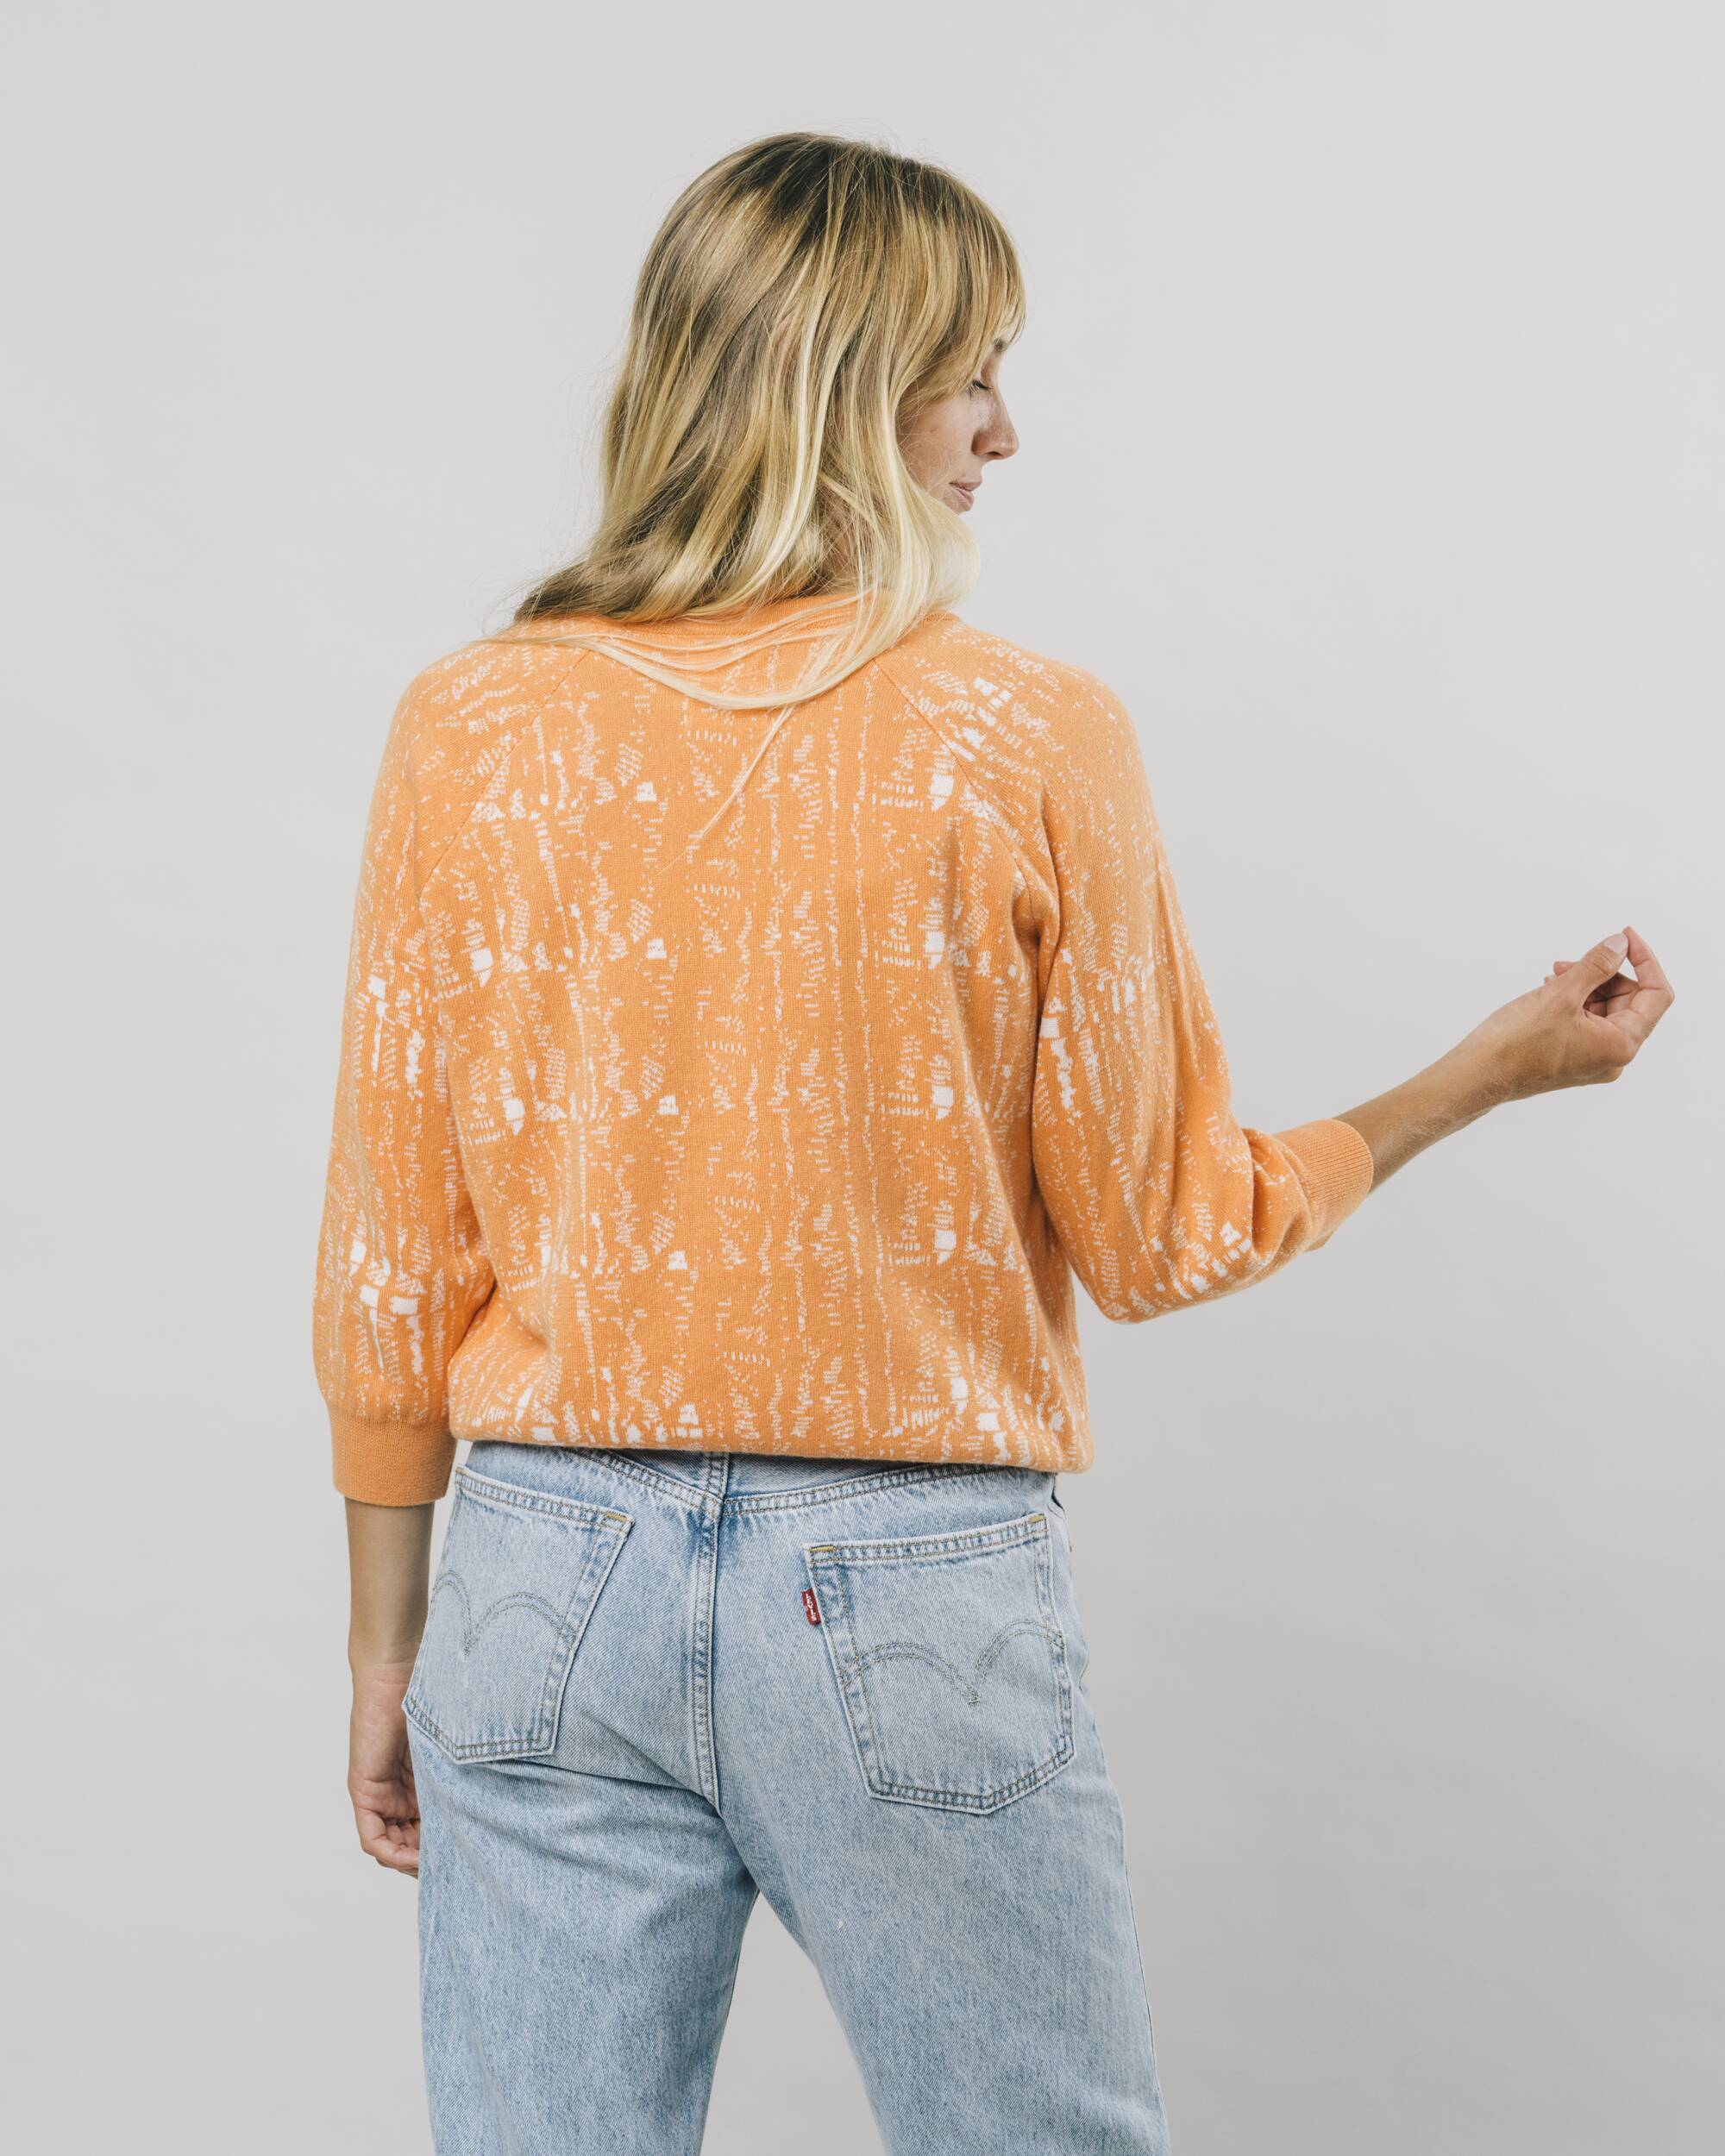 Sweater "Camou" in orange with ¾ sleeves made of 100% organic cotton from Brava Fabrics